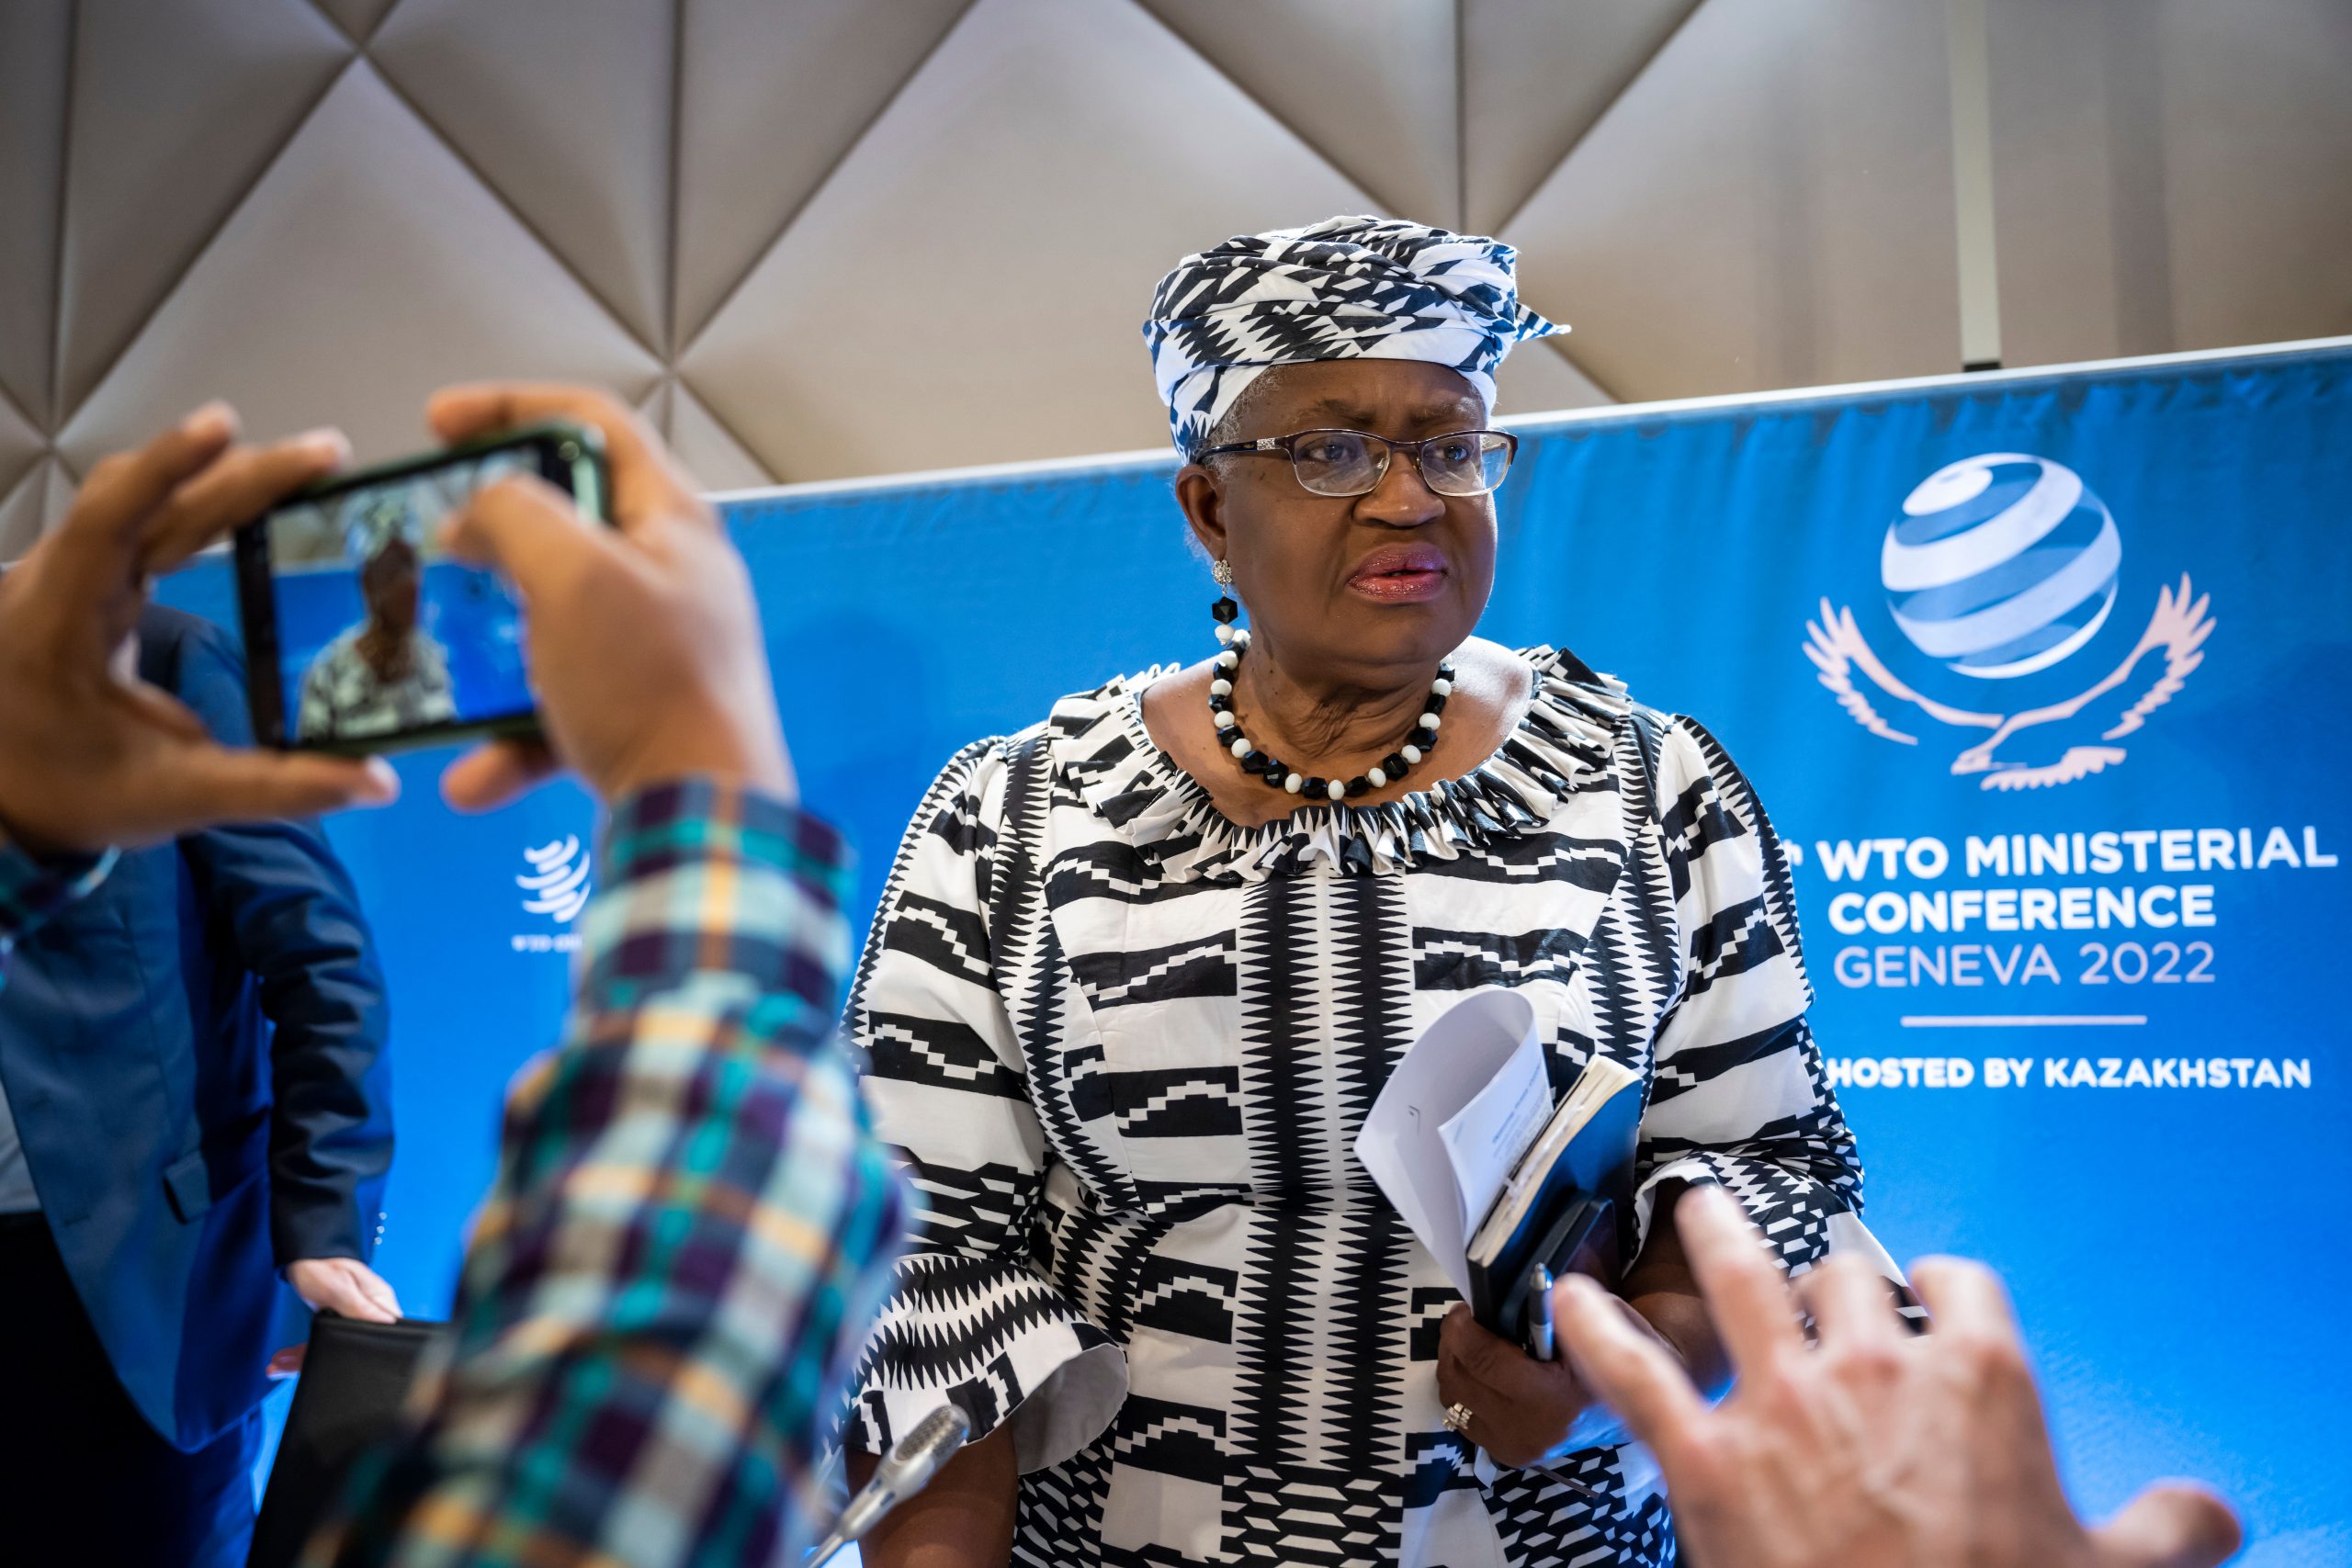 In a bid to seal elusive deals, officials to extend WTO ministerial conference